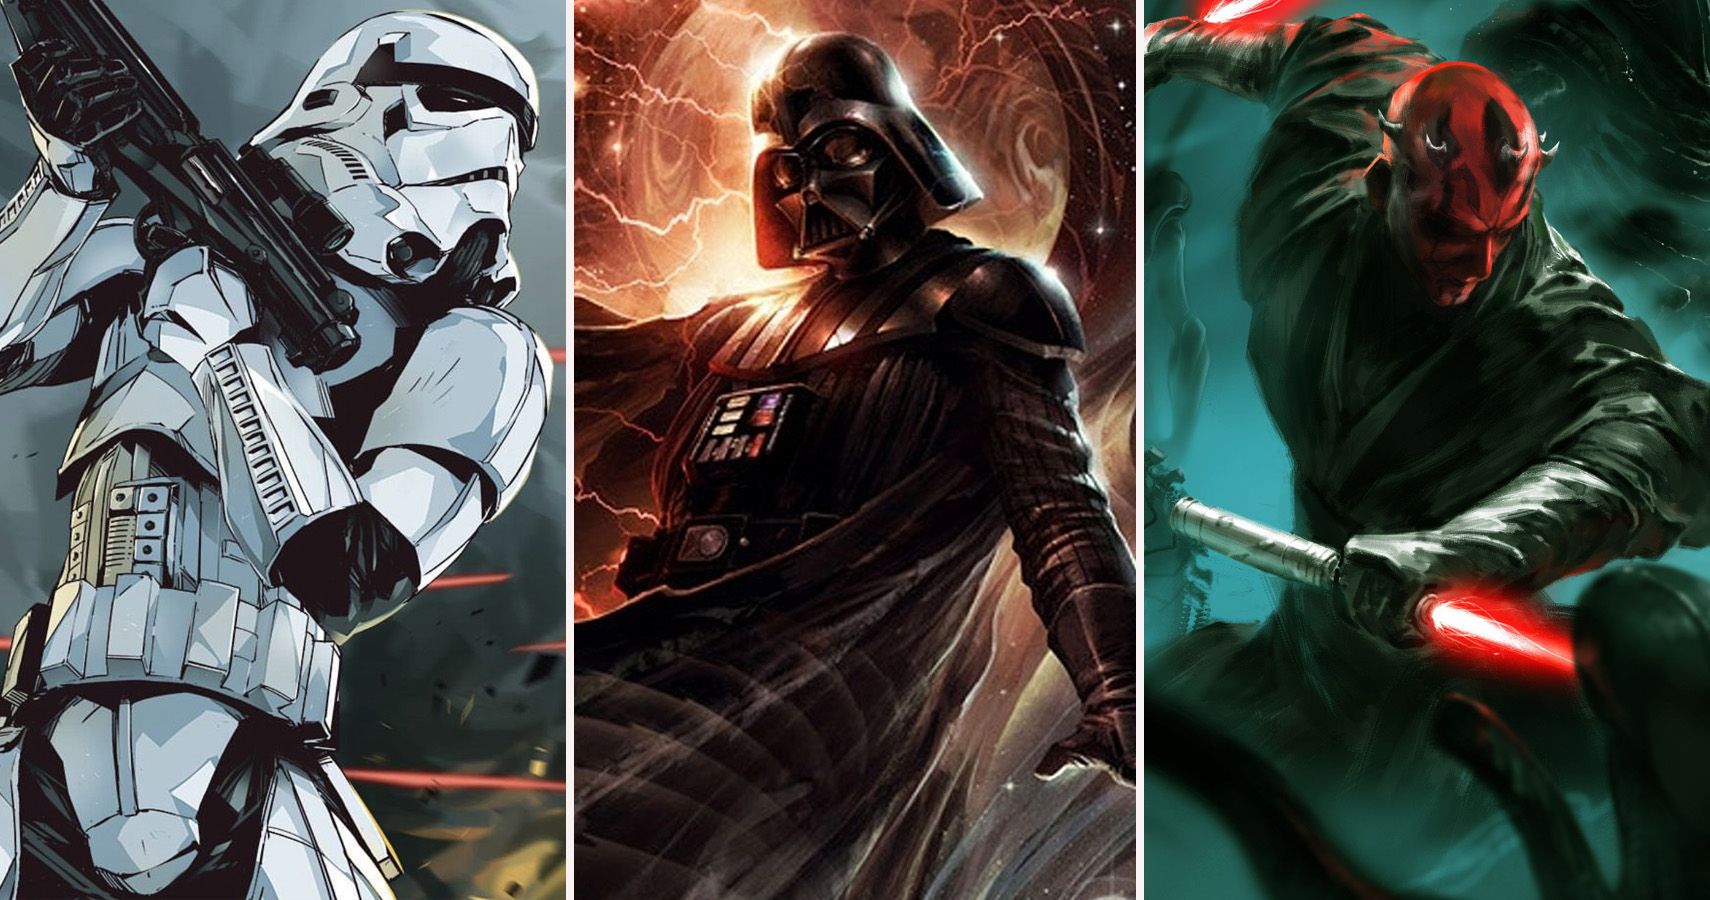 Star Wars Villains From Weakest To Strongest, Officially Ranked